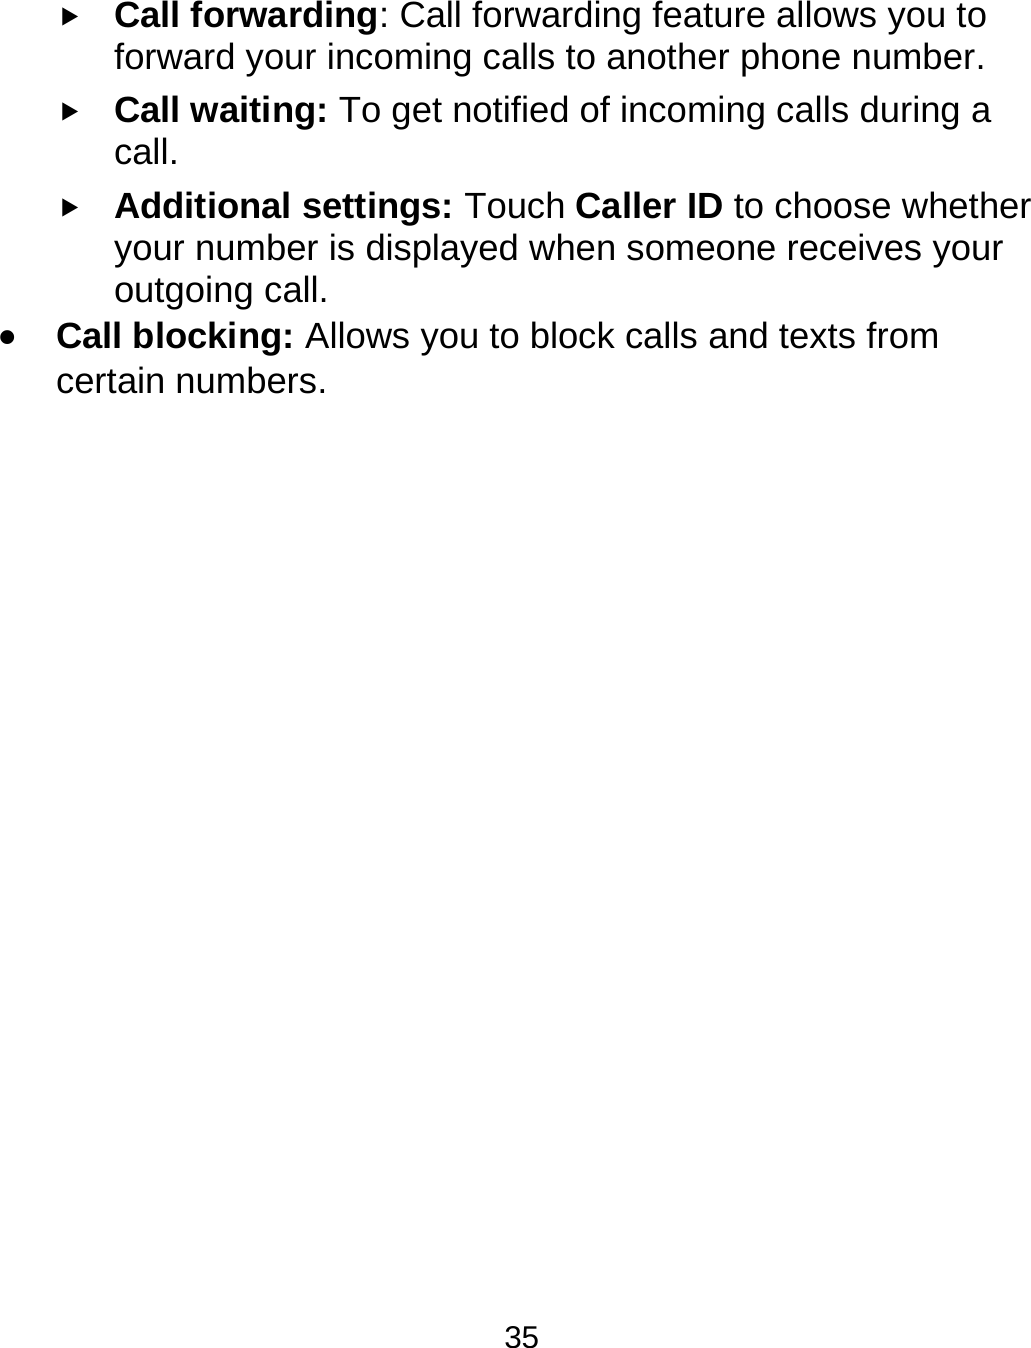  35  Call forwarding: Call forwarding feature allows you to forward your incoming calls to another phone number.  Call waiting: To get notified of incoming calls during a call.   Additional settings: Touch Caller ID to choose whether your number is displayed when someone receives your outgoing call.    Call blocking: Allows you to block calls and texts from certain numbers.               